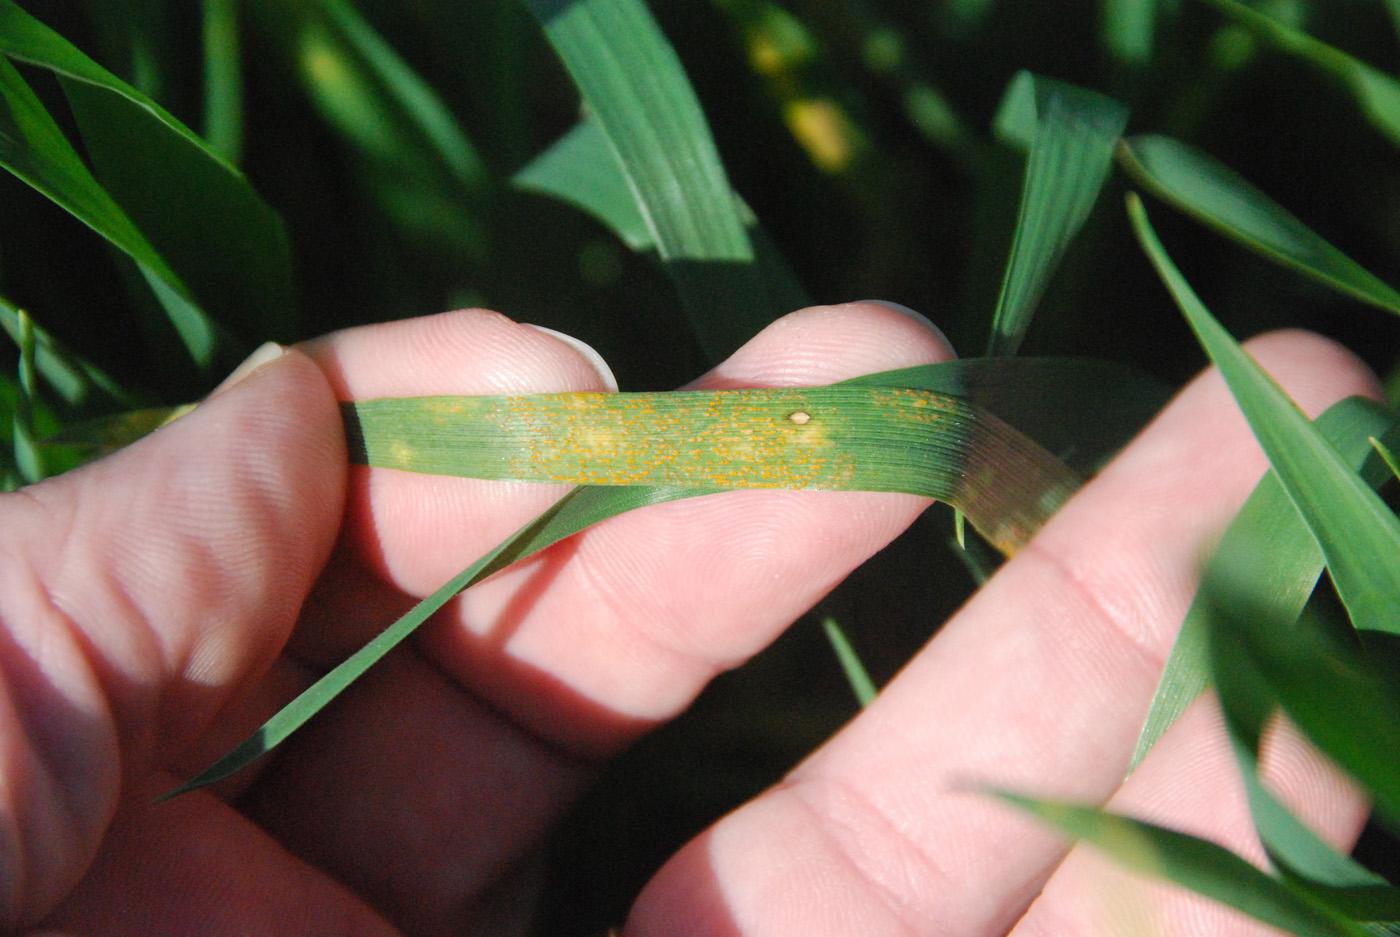 This wheat leaf is infected with stripe rust, an unusual occurrence this early in the growing season. Wheat stripe rust has been spotted in Mississippi and Arkansas. (Photo by MSU Extension Service/Tom Allen)